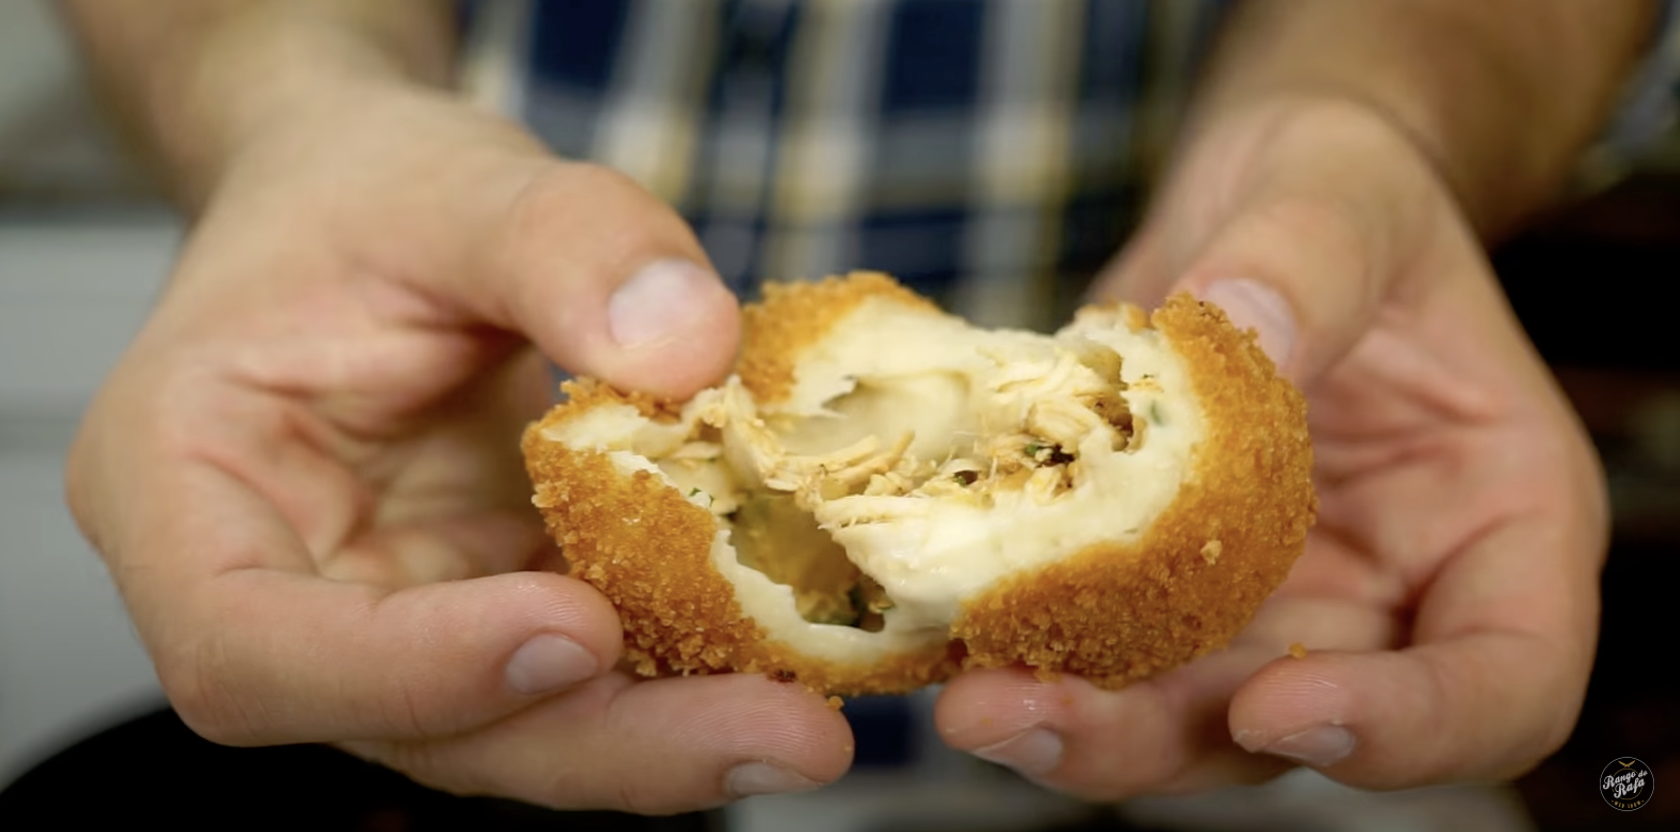 A person holding a coxinha pulled apart